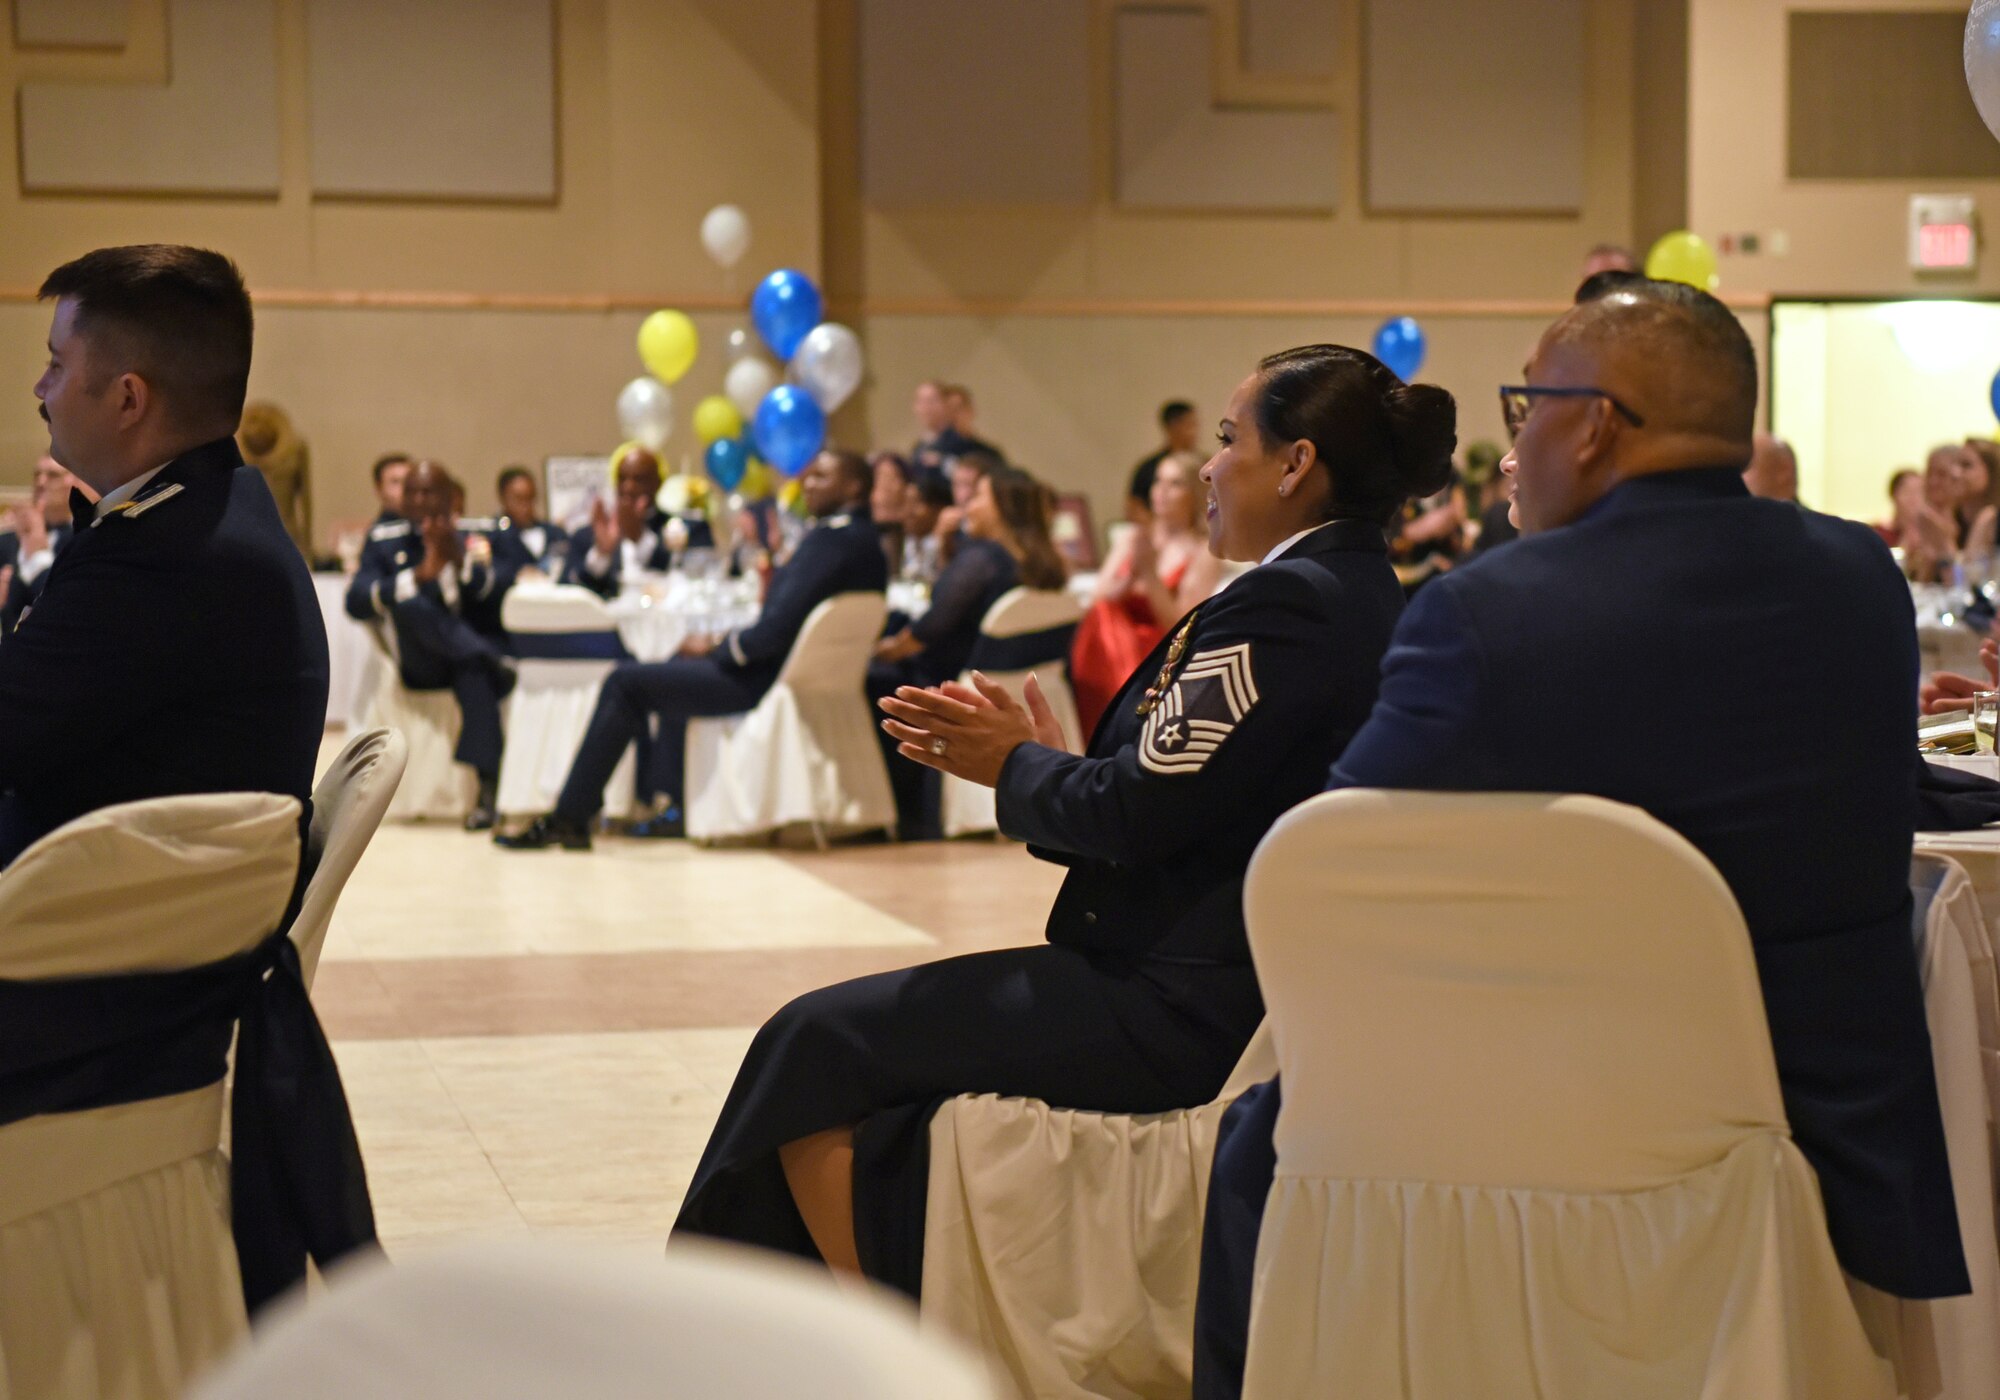 Members assigned to the 17th Training Wing applaud retired U.S. Air Force Gen. Lori Robinson, guest speaker and former 17th TRW commander, during the annual Air Force Ball, at the McNease Convention Center, in San Angelo, Texas, Sept. 17, 2022. More than 350 people attended the ball. (U.S. Air Force photo by Senior Airman Abbey Rieves)